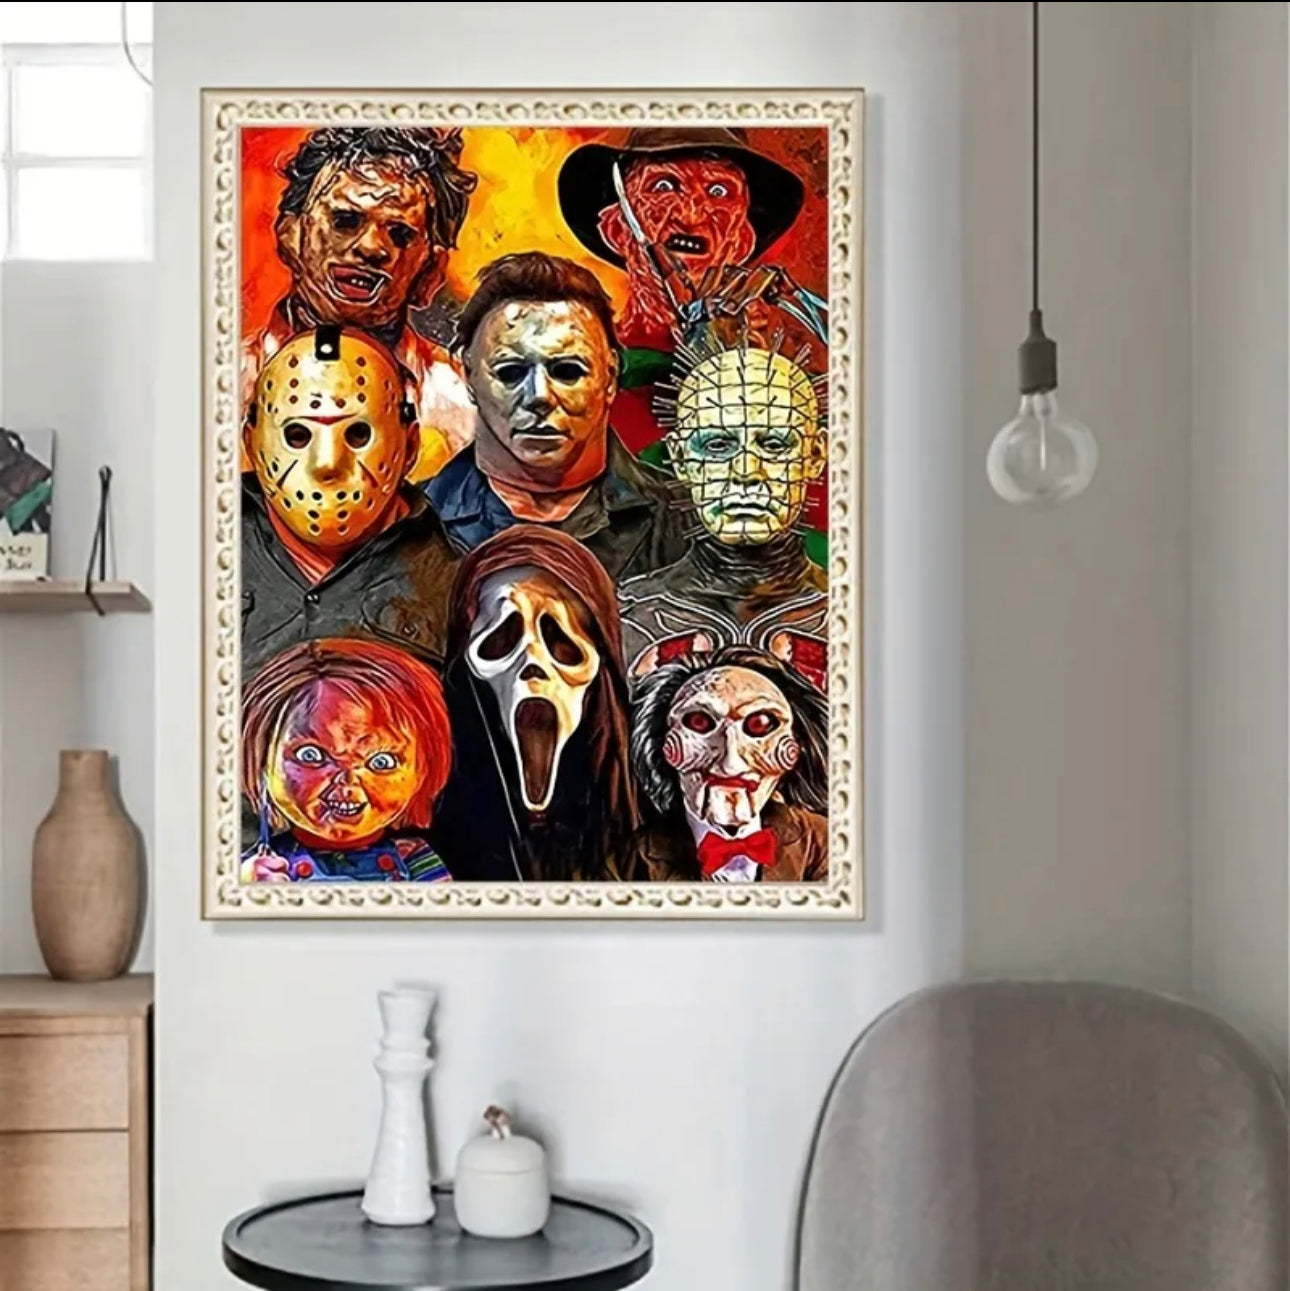 DIY Halloween Artwork: 5D Artificial Diamond Painting Kit - Perfect Gift for Adults & Kids!